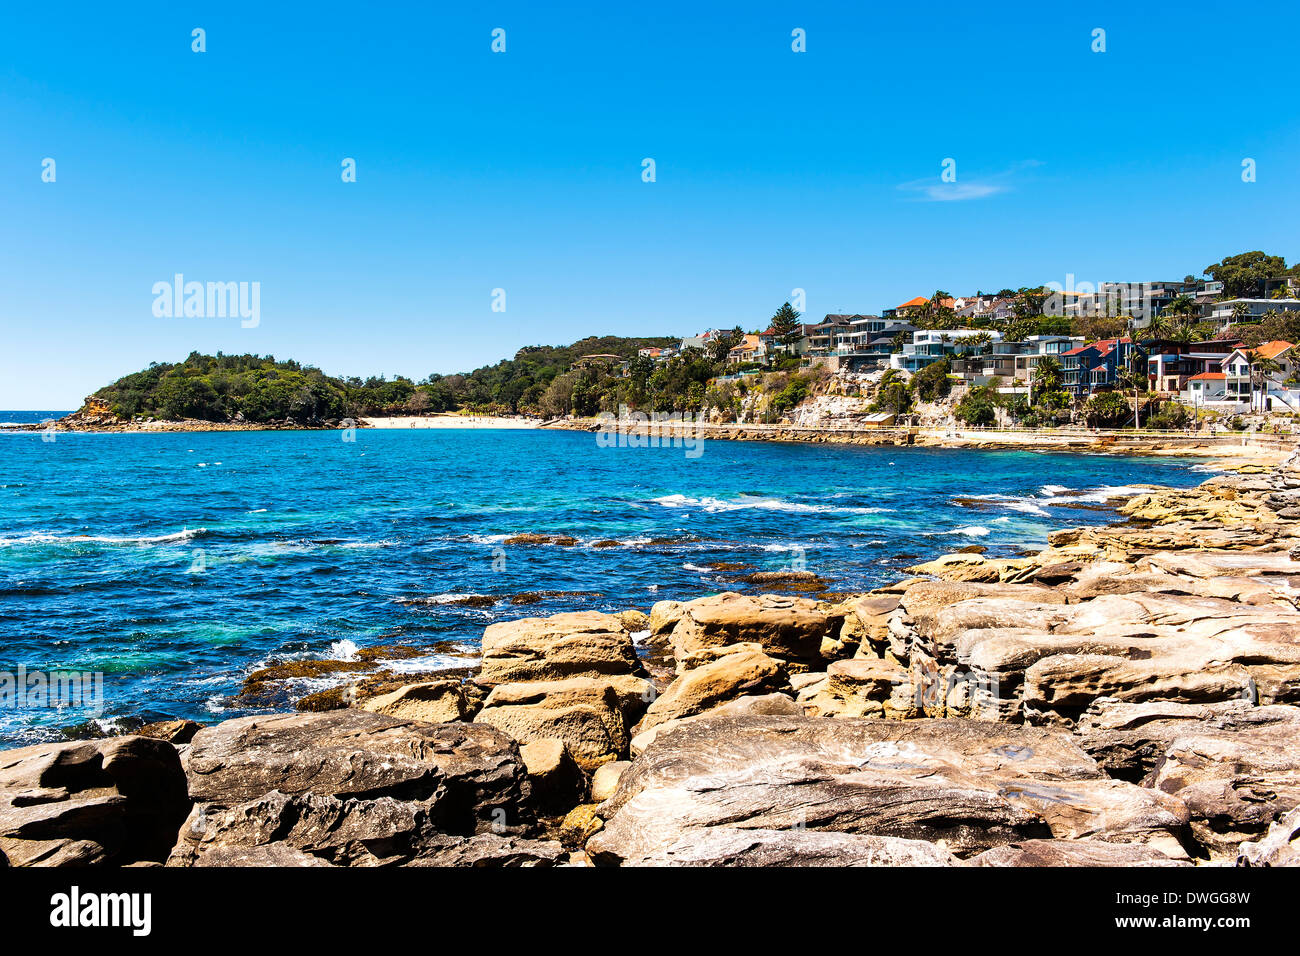 Manly Beach looking across Cabbage Tree Bay to Shelly Beach Stock Photo